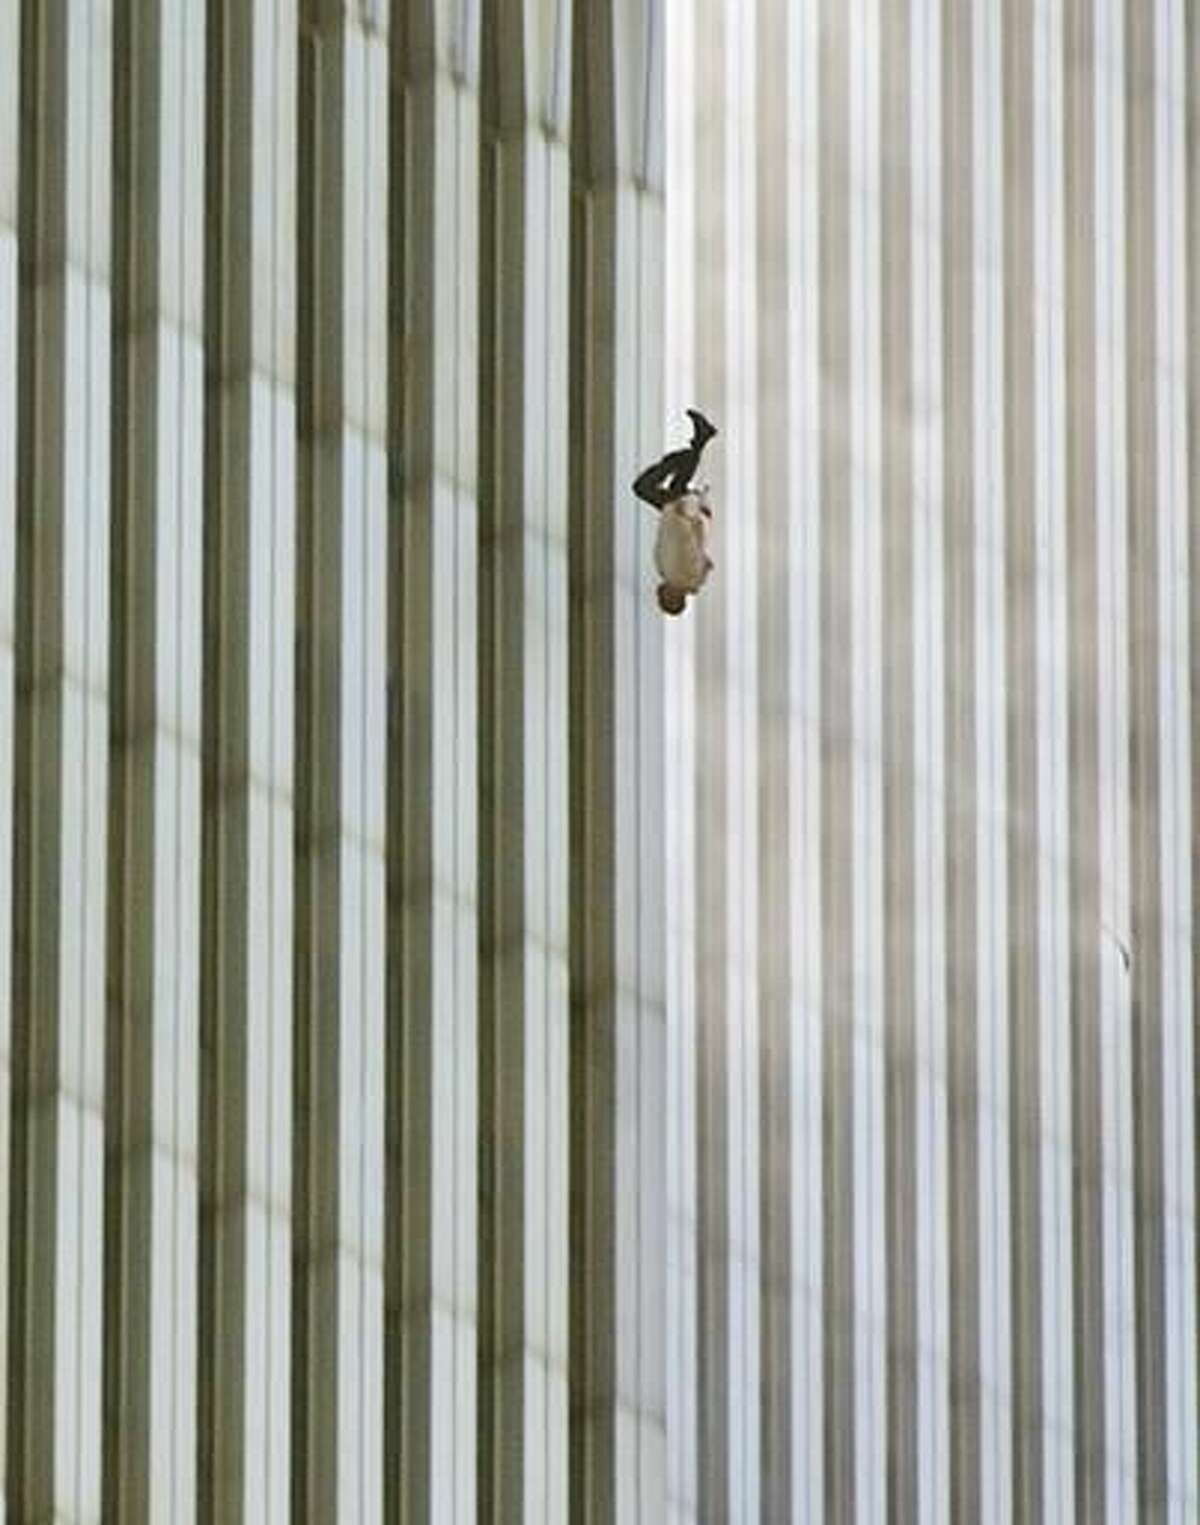 FILE - In this Tuesday, Sept. 11, 2001 file picture, a person falls headfirst from the north tower of New York's World Trade Center. This iconic image is included in Time magazine's most influential images of all time, released Thursday, Nov. 17, 2016, through a new book, videos and a website, Time.com/100photos. (AP Photo/Richard Drew, File)